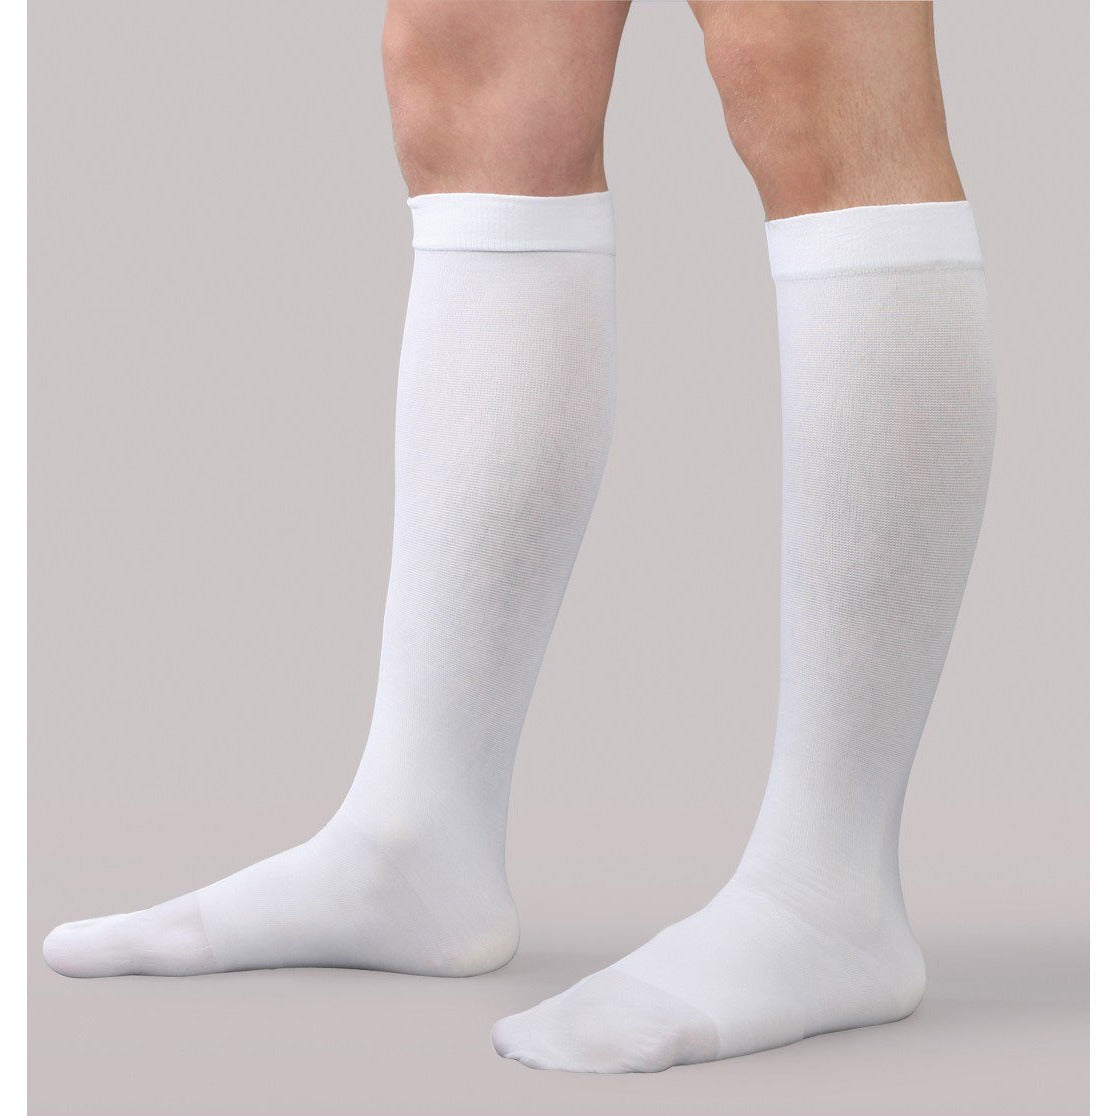 FITLEGS Anti-Embolism Stockings (AES) Grip Medium (M), Women's Fashion,  Watches & Accessories, Socks & Tights on Carousell